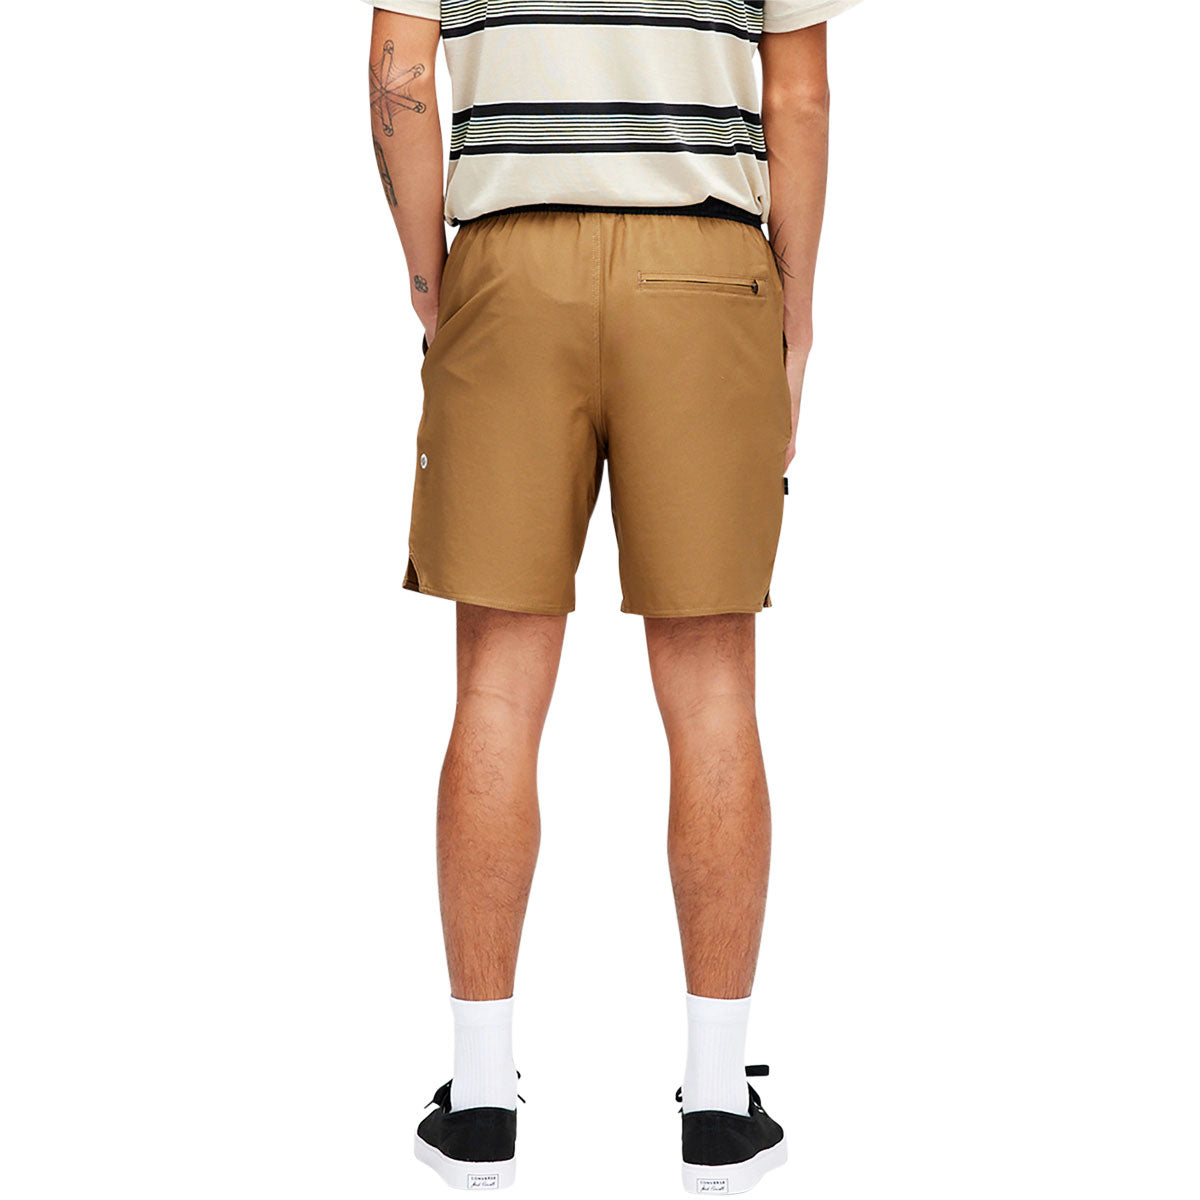 Stance Complex Shorts - Brown image 5